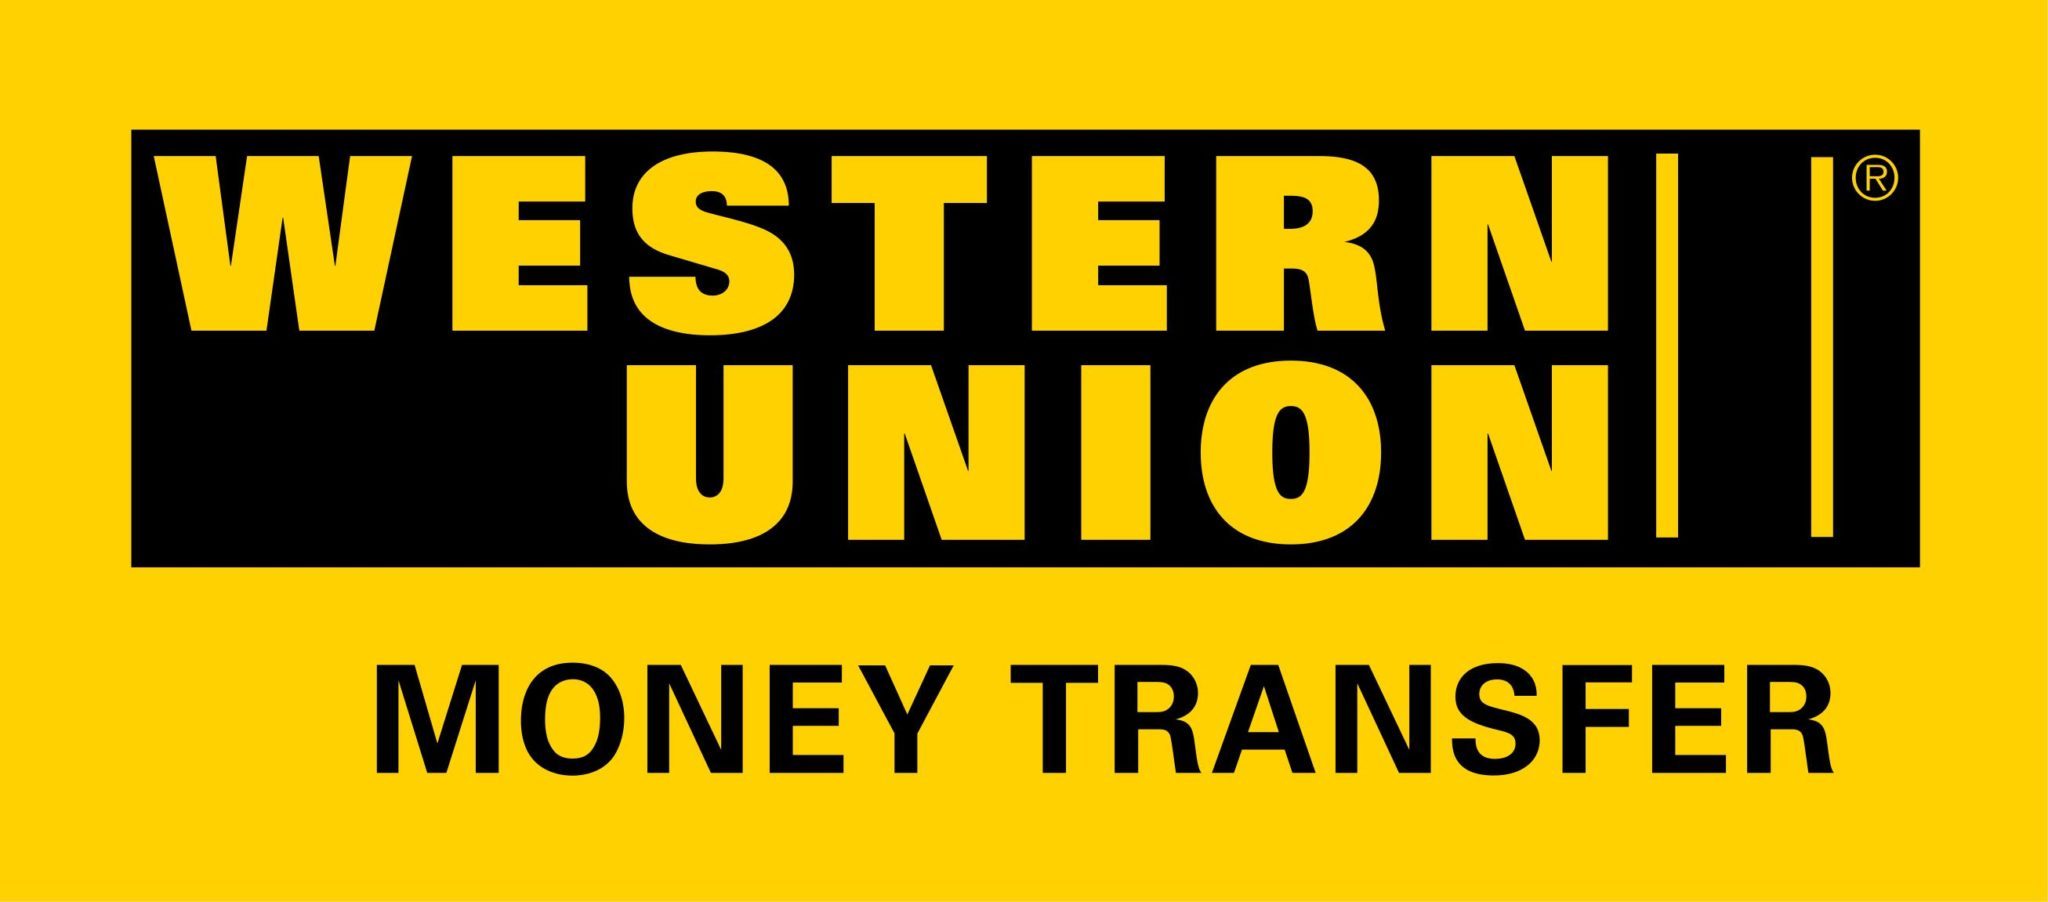 Western-Union-Adds-Bank-Account-Based-Funding-Options-for-Users-in-5-Countries-Adds-Mobile-Money-Transfer-Service-in-Ivory-Coast.jpg (2613×1151)